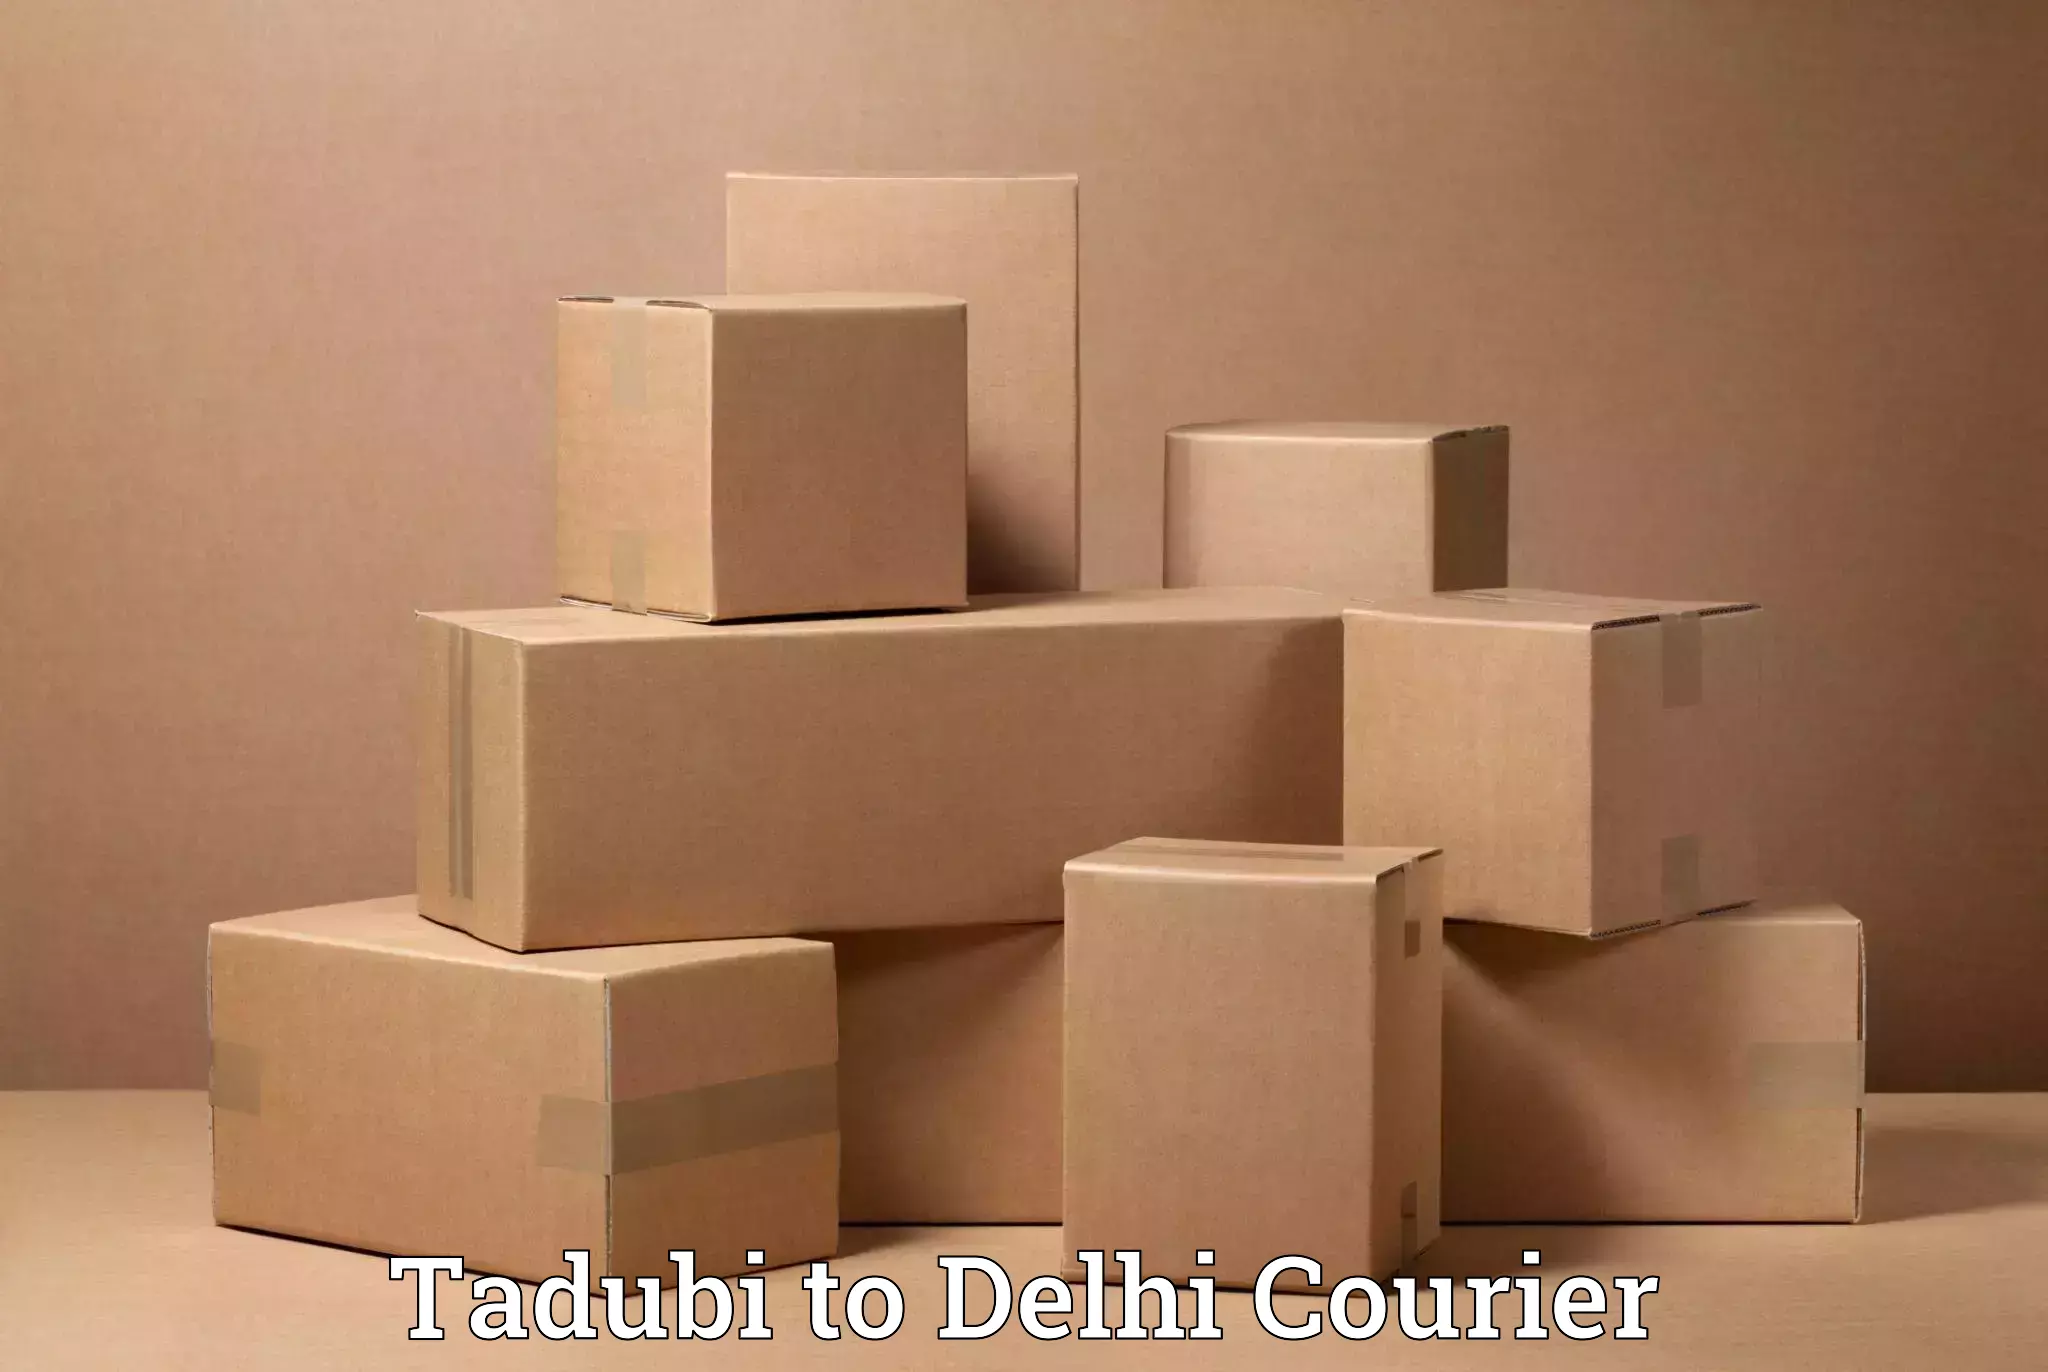 Moving and packing experts Tadubi to Delhi